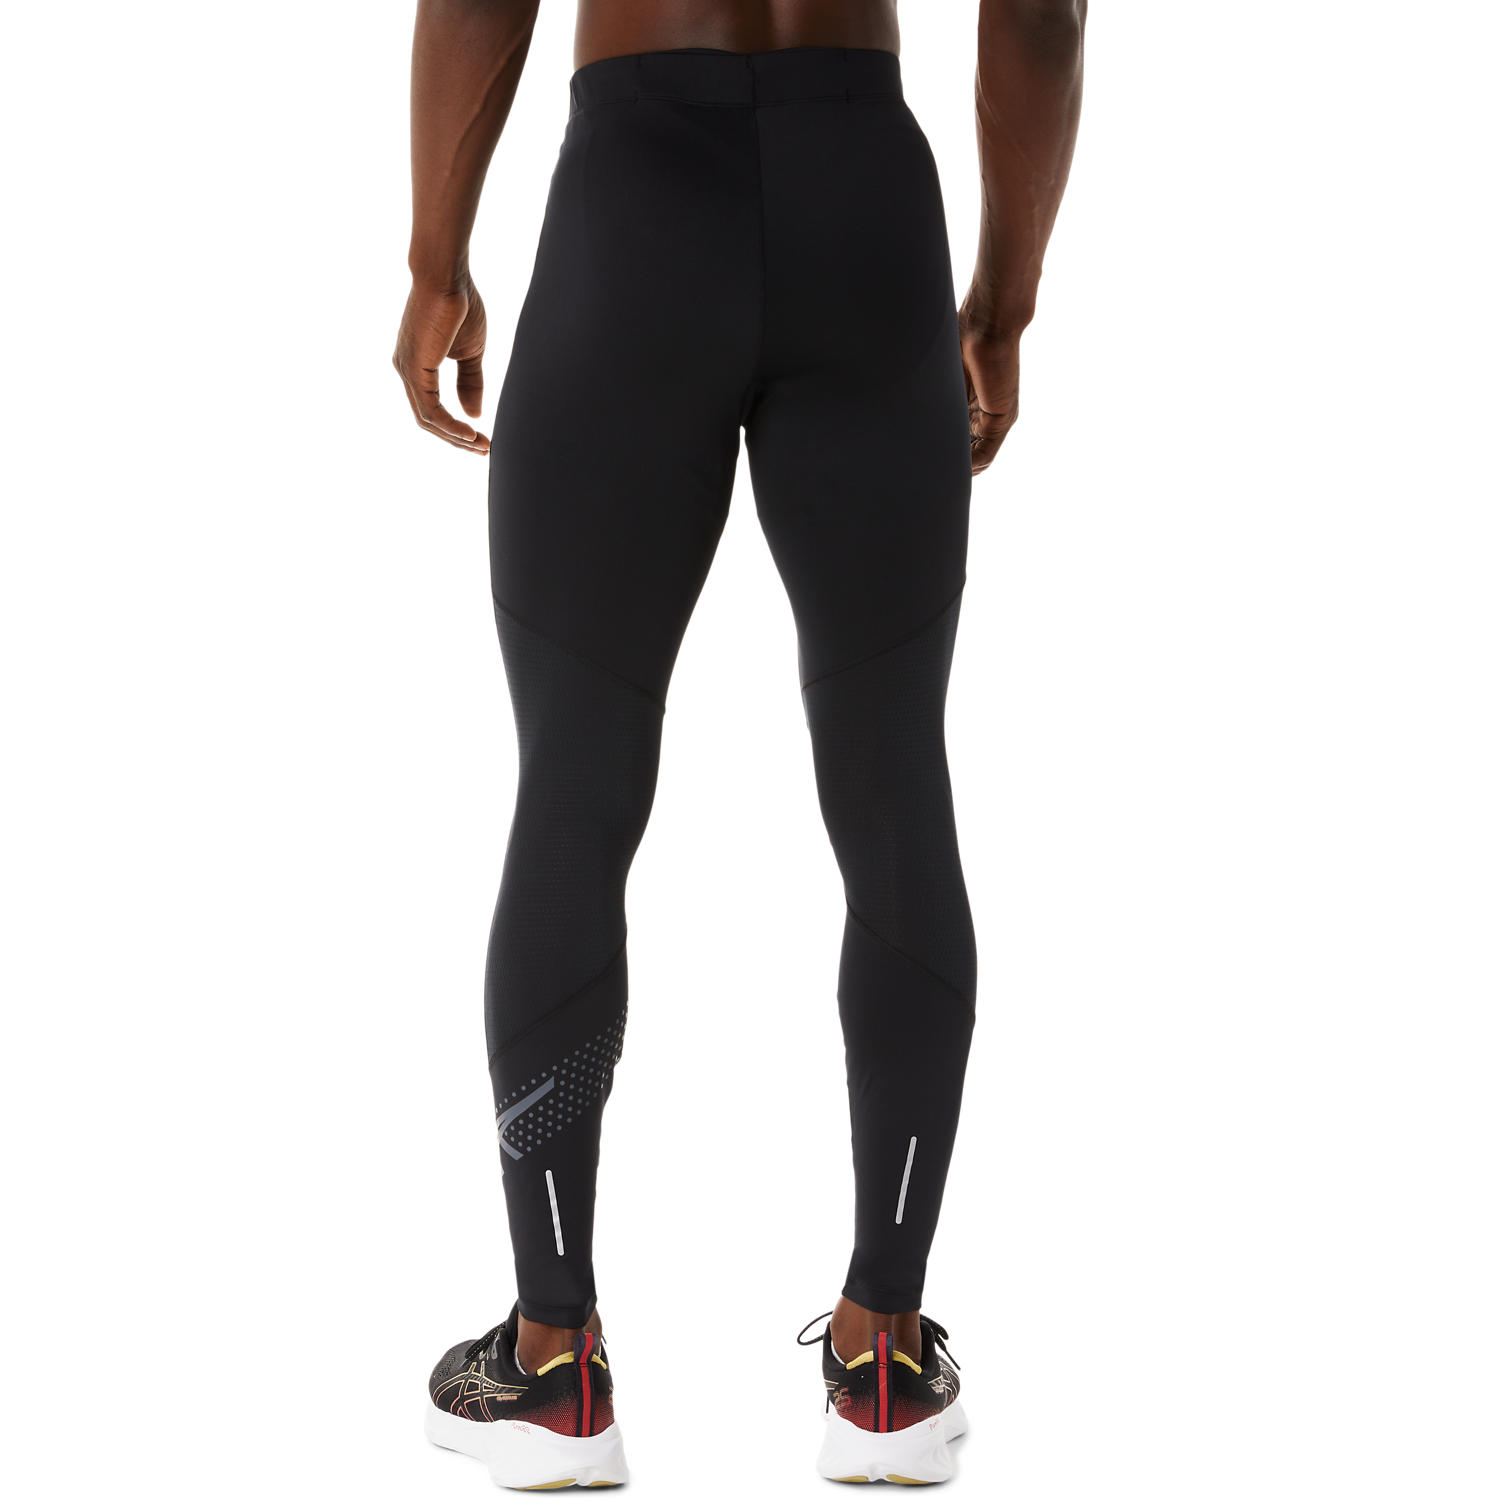 TCA Men's Power Running Tights with Zip Pockets and Hems - Cool Grey/Black  - ShopStyle Activewear Trousers